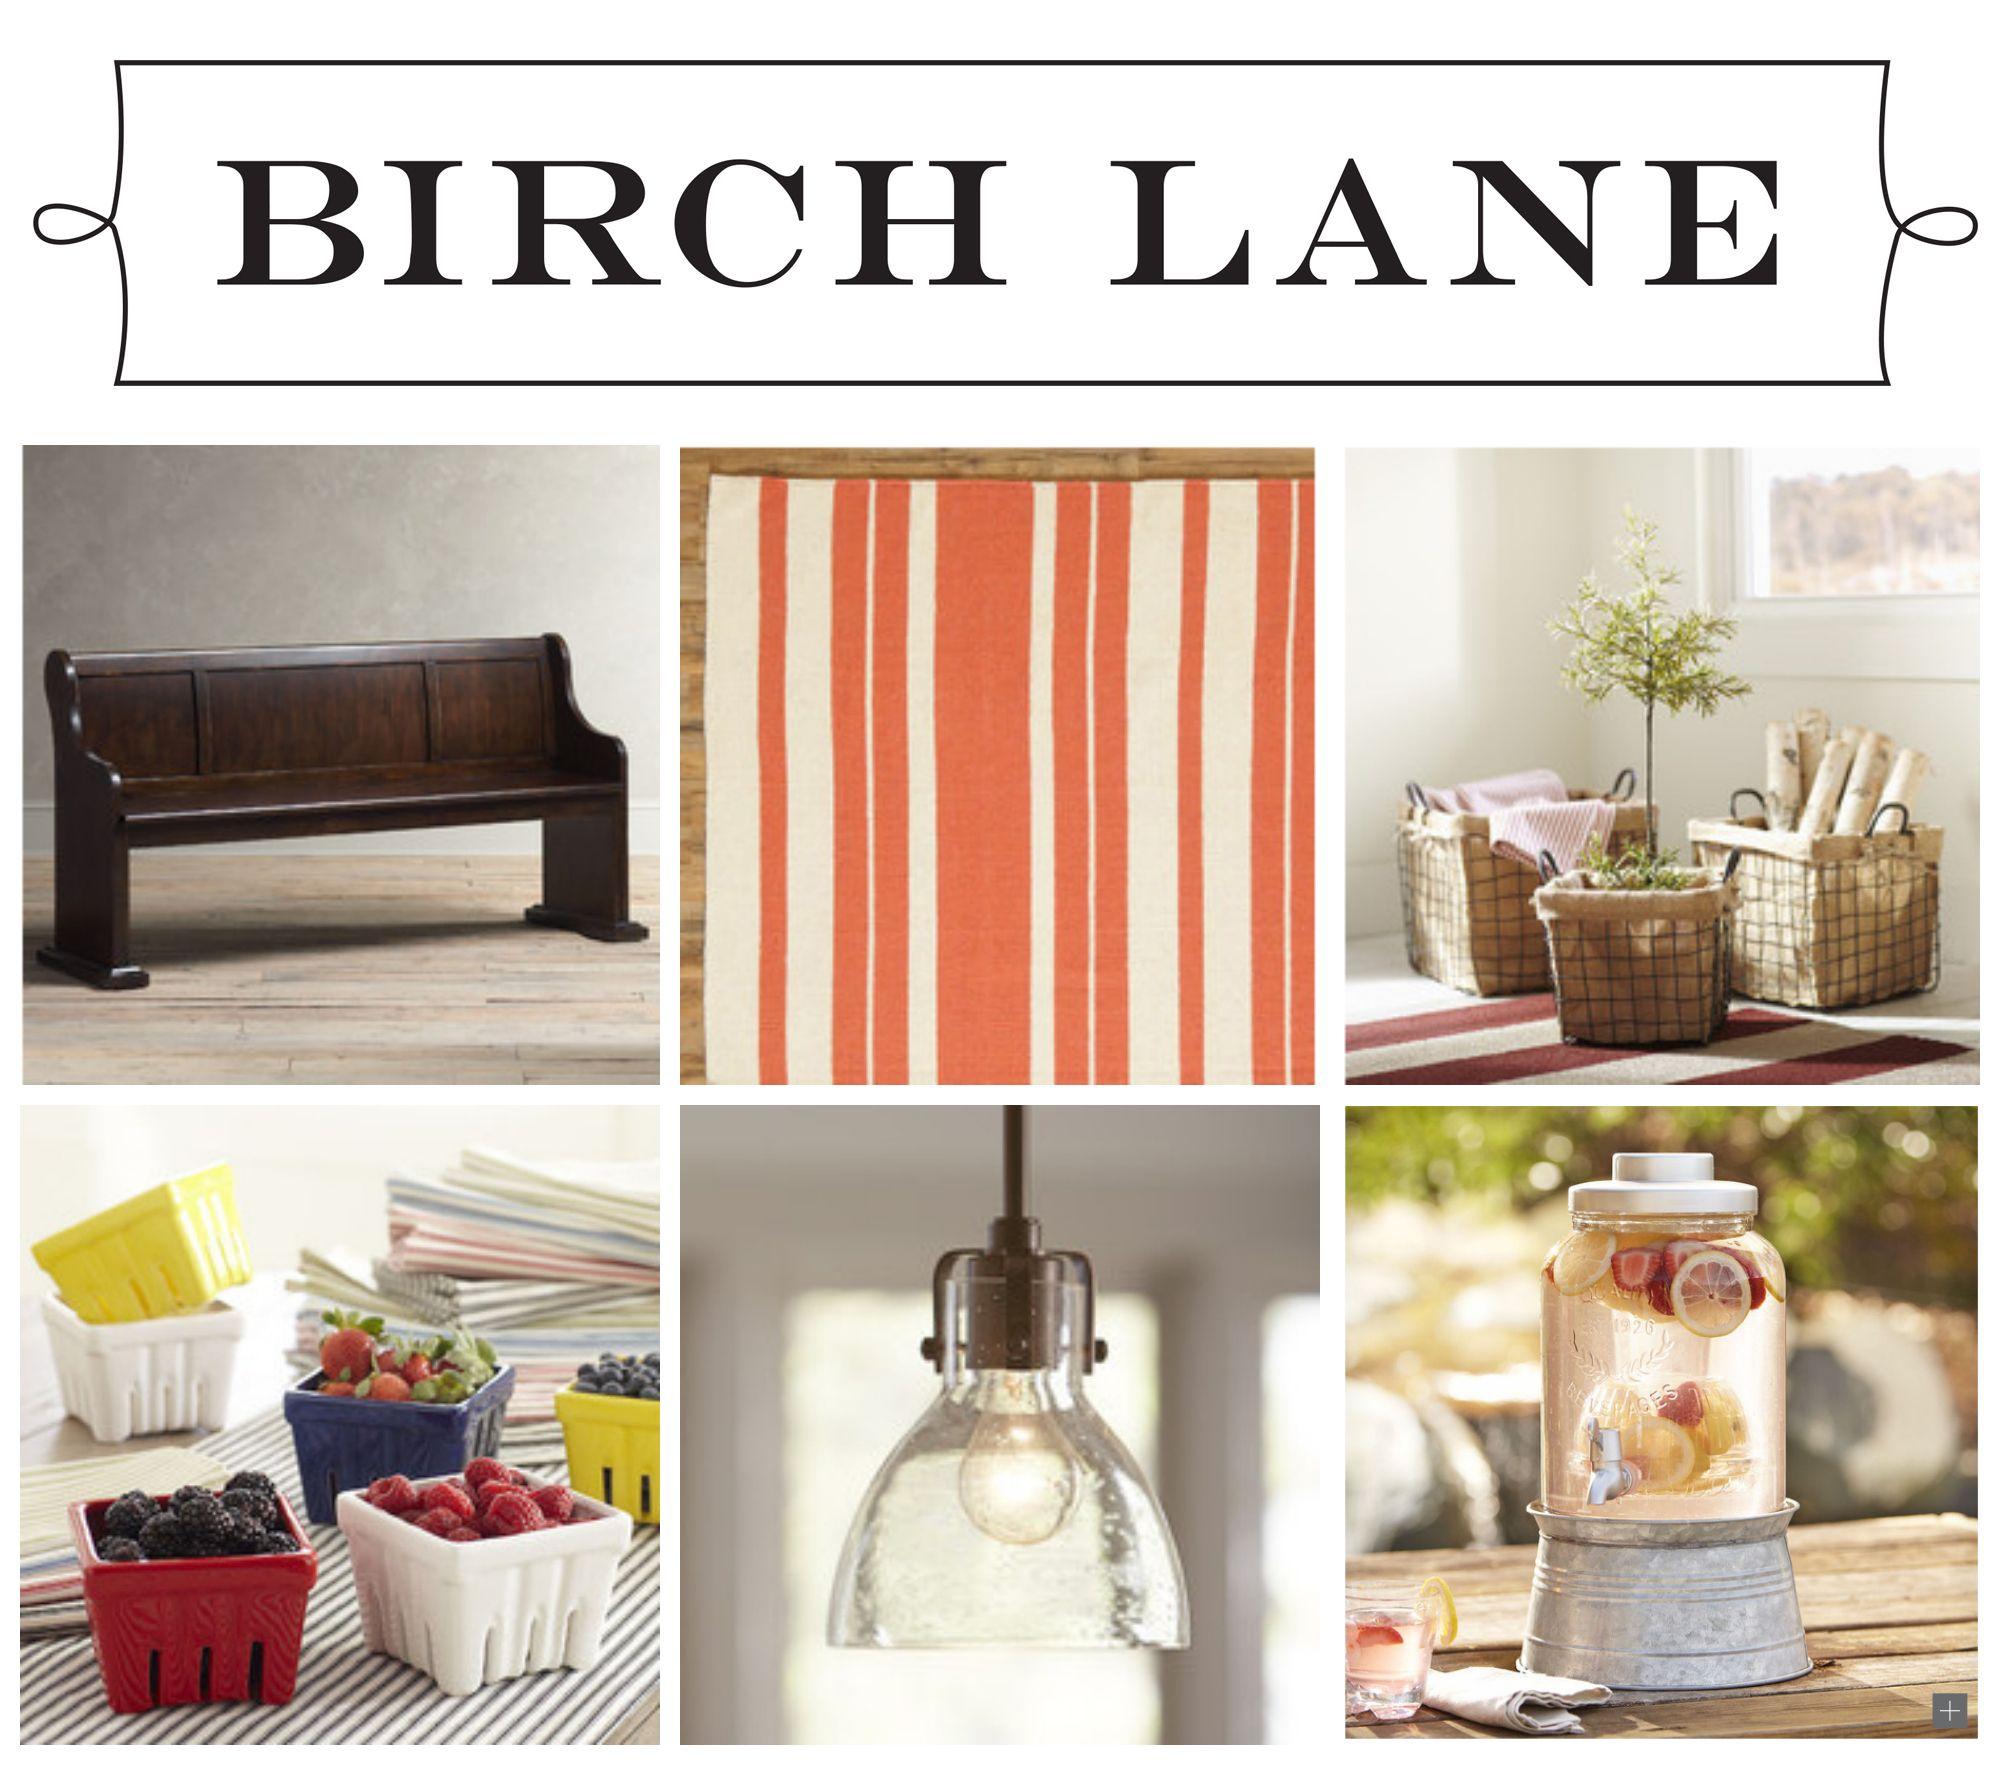 Birch Lane Logo - The Story of My Mismatched Chairs - Stacy Risenmay